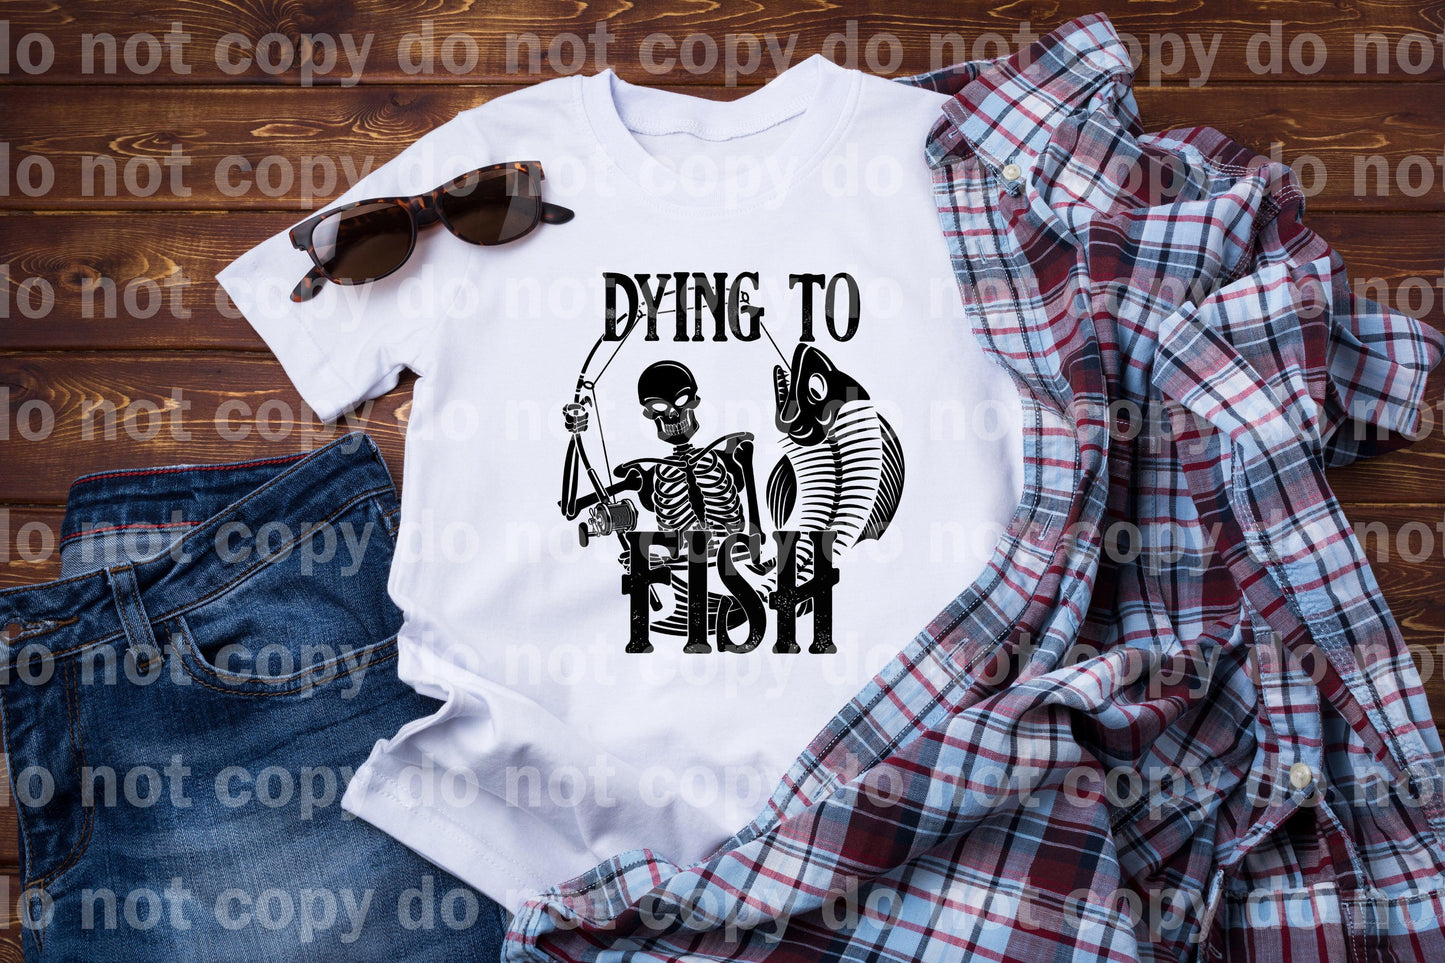 Dying to Fish Skellie Black Dream Print or Sublimation Print